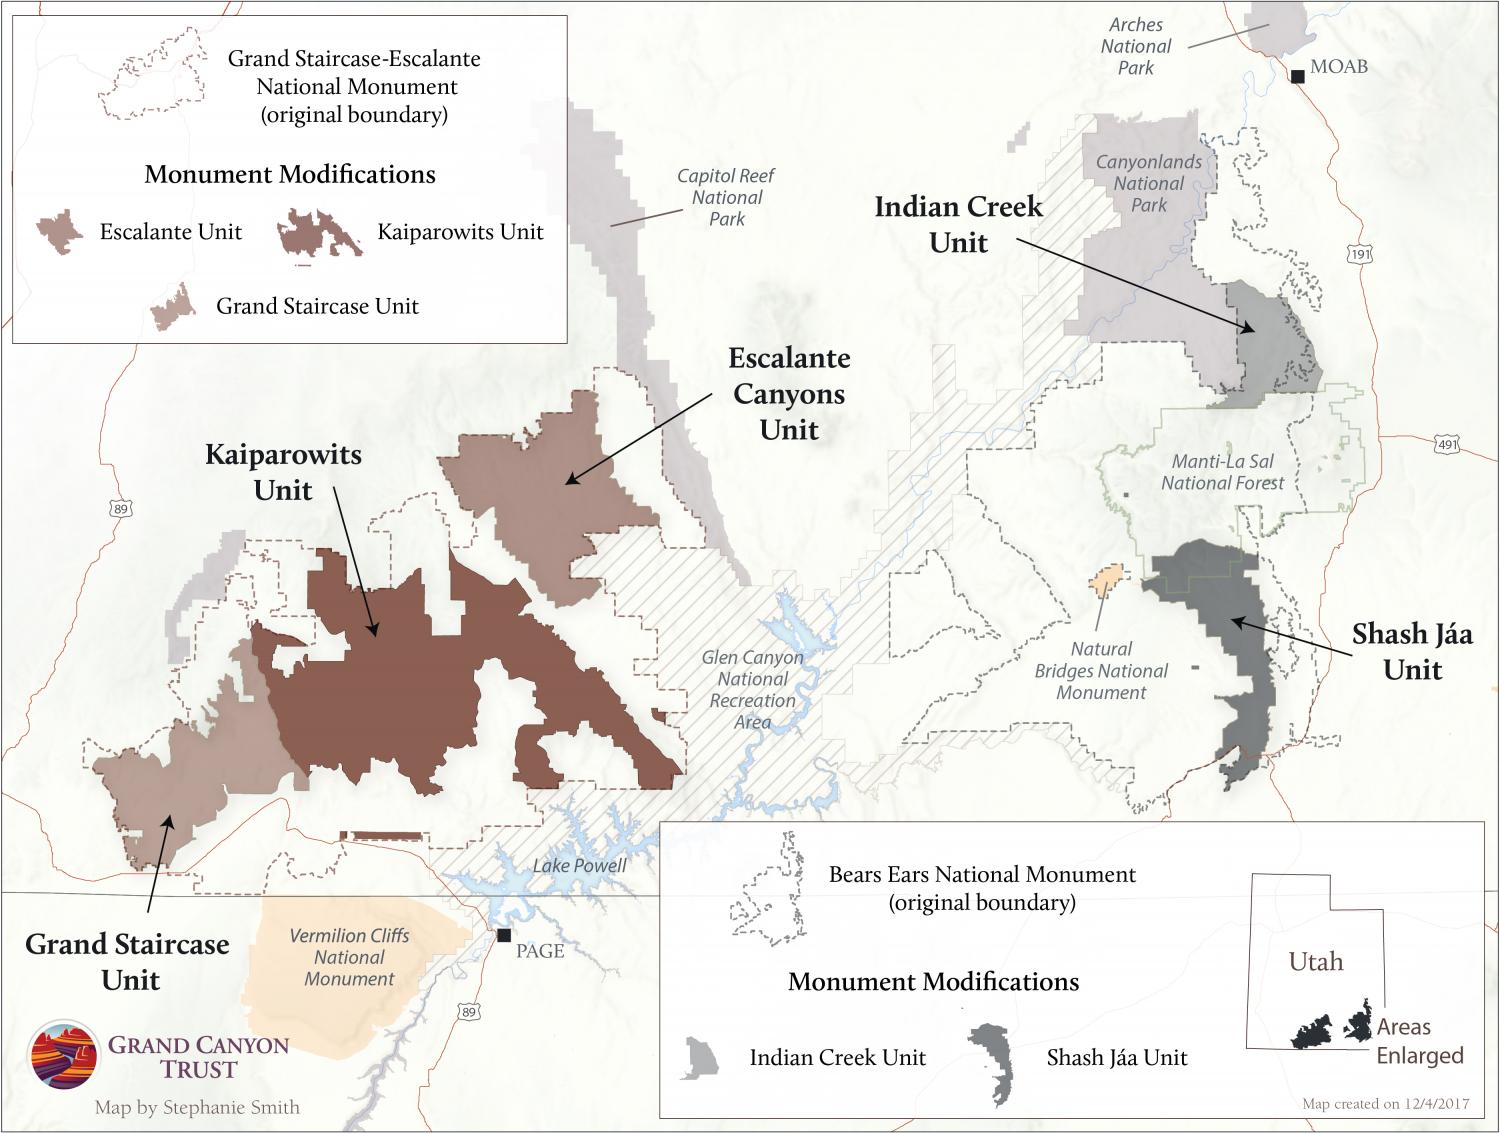 Modifications to Bears Ears and Grand Staircase-Escalante national monuments